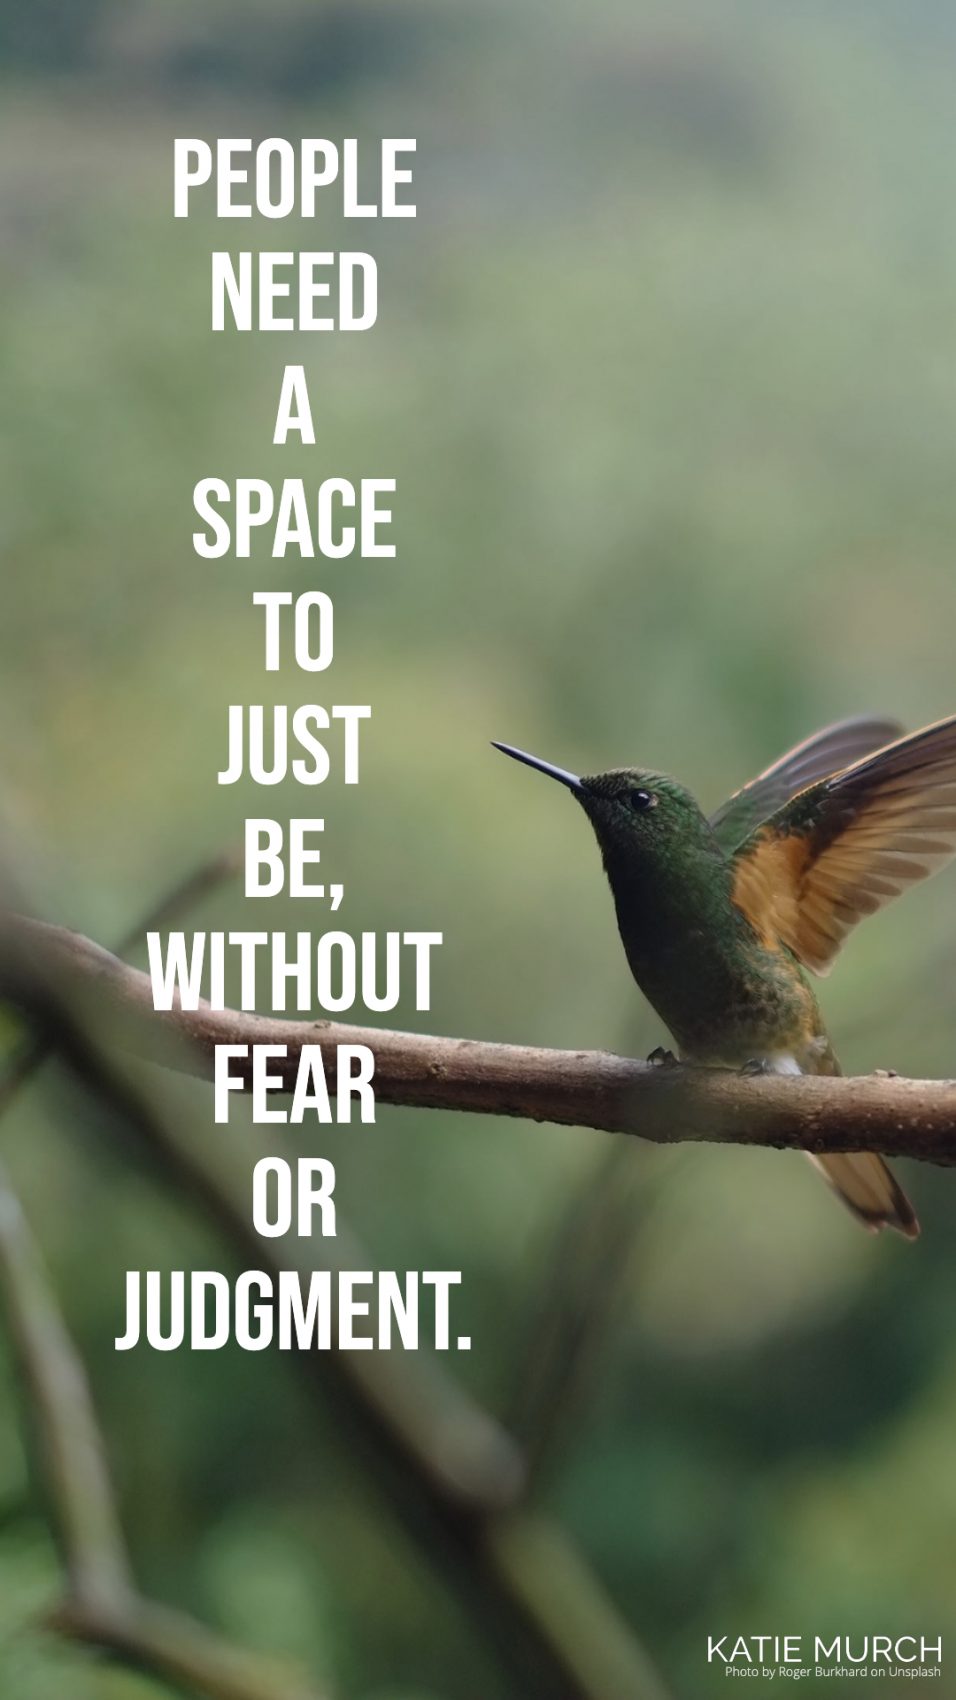 Quote is on the left of the photo while in the back is a green and brown hummingbird with its wings open perched on a brown branch. Katie Murch and photo credit is on the bottom right of the image.